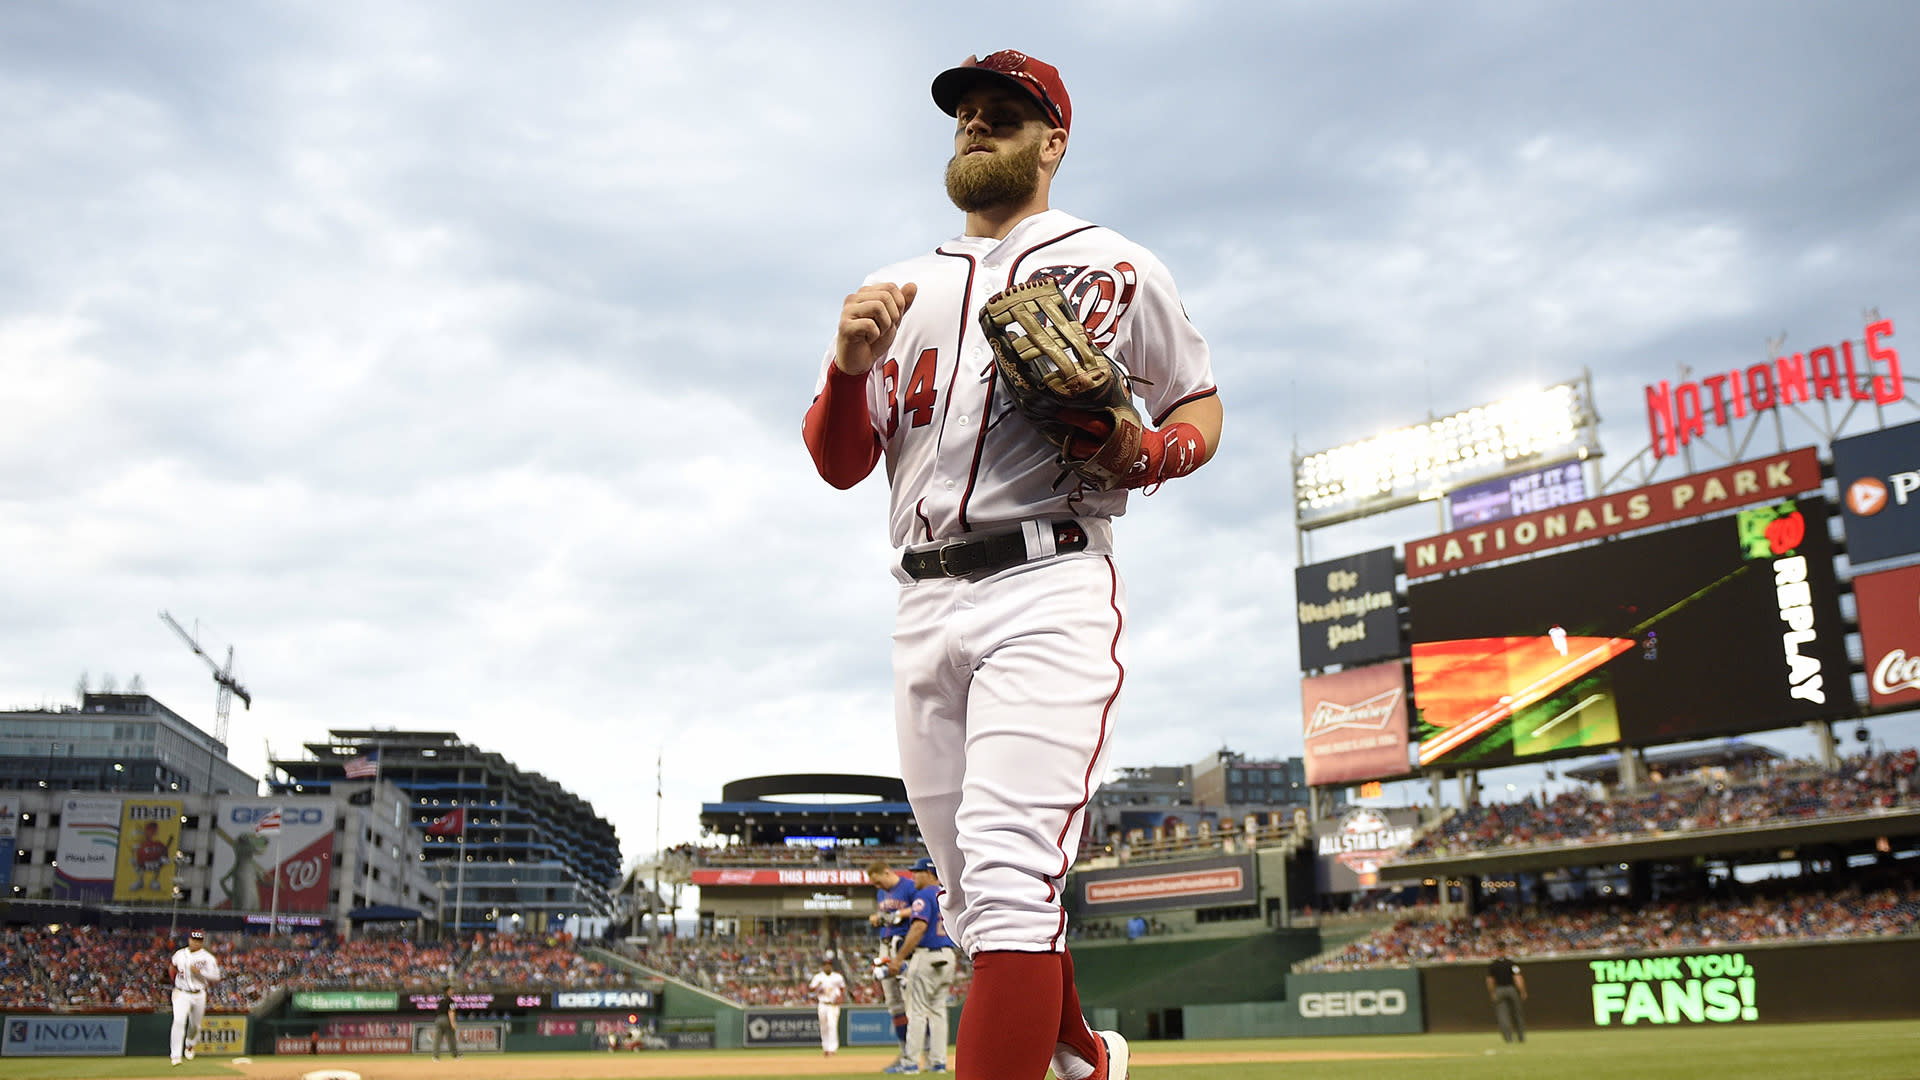 Bryce Harper triggered multiple contractual bonuses during awards season   Phillies Nation - Your source for Philadelphia Phillies news, opinion,  history, rumors, events, and other fun stuff.